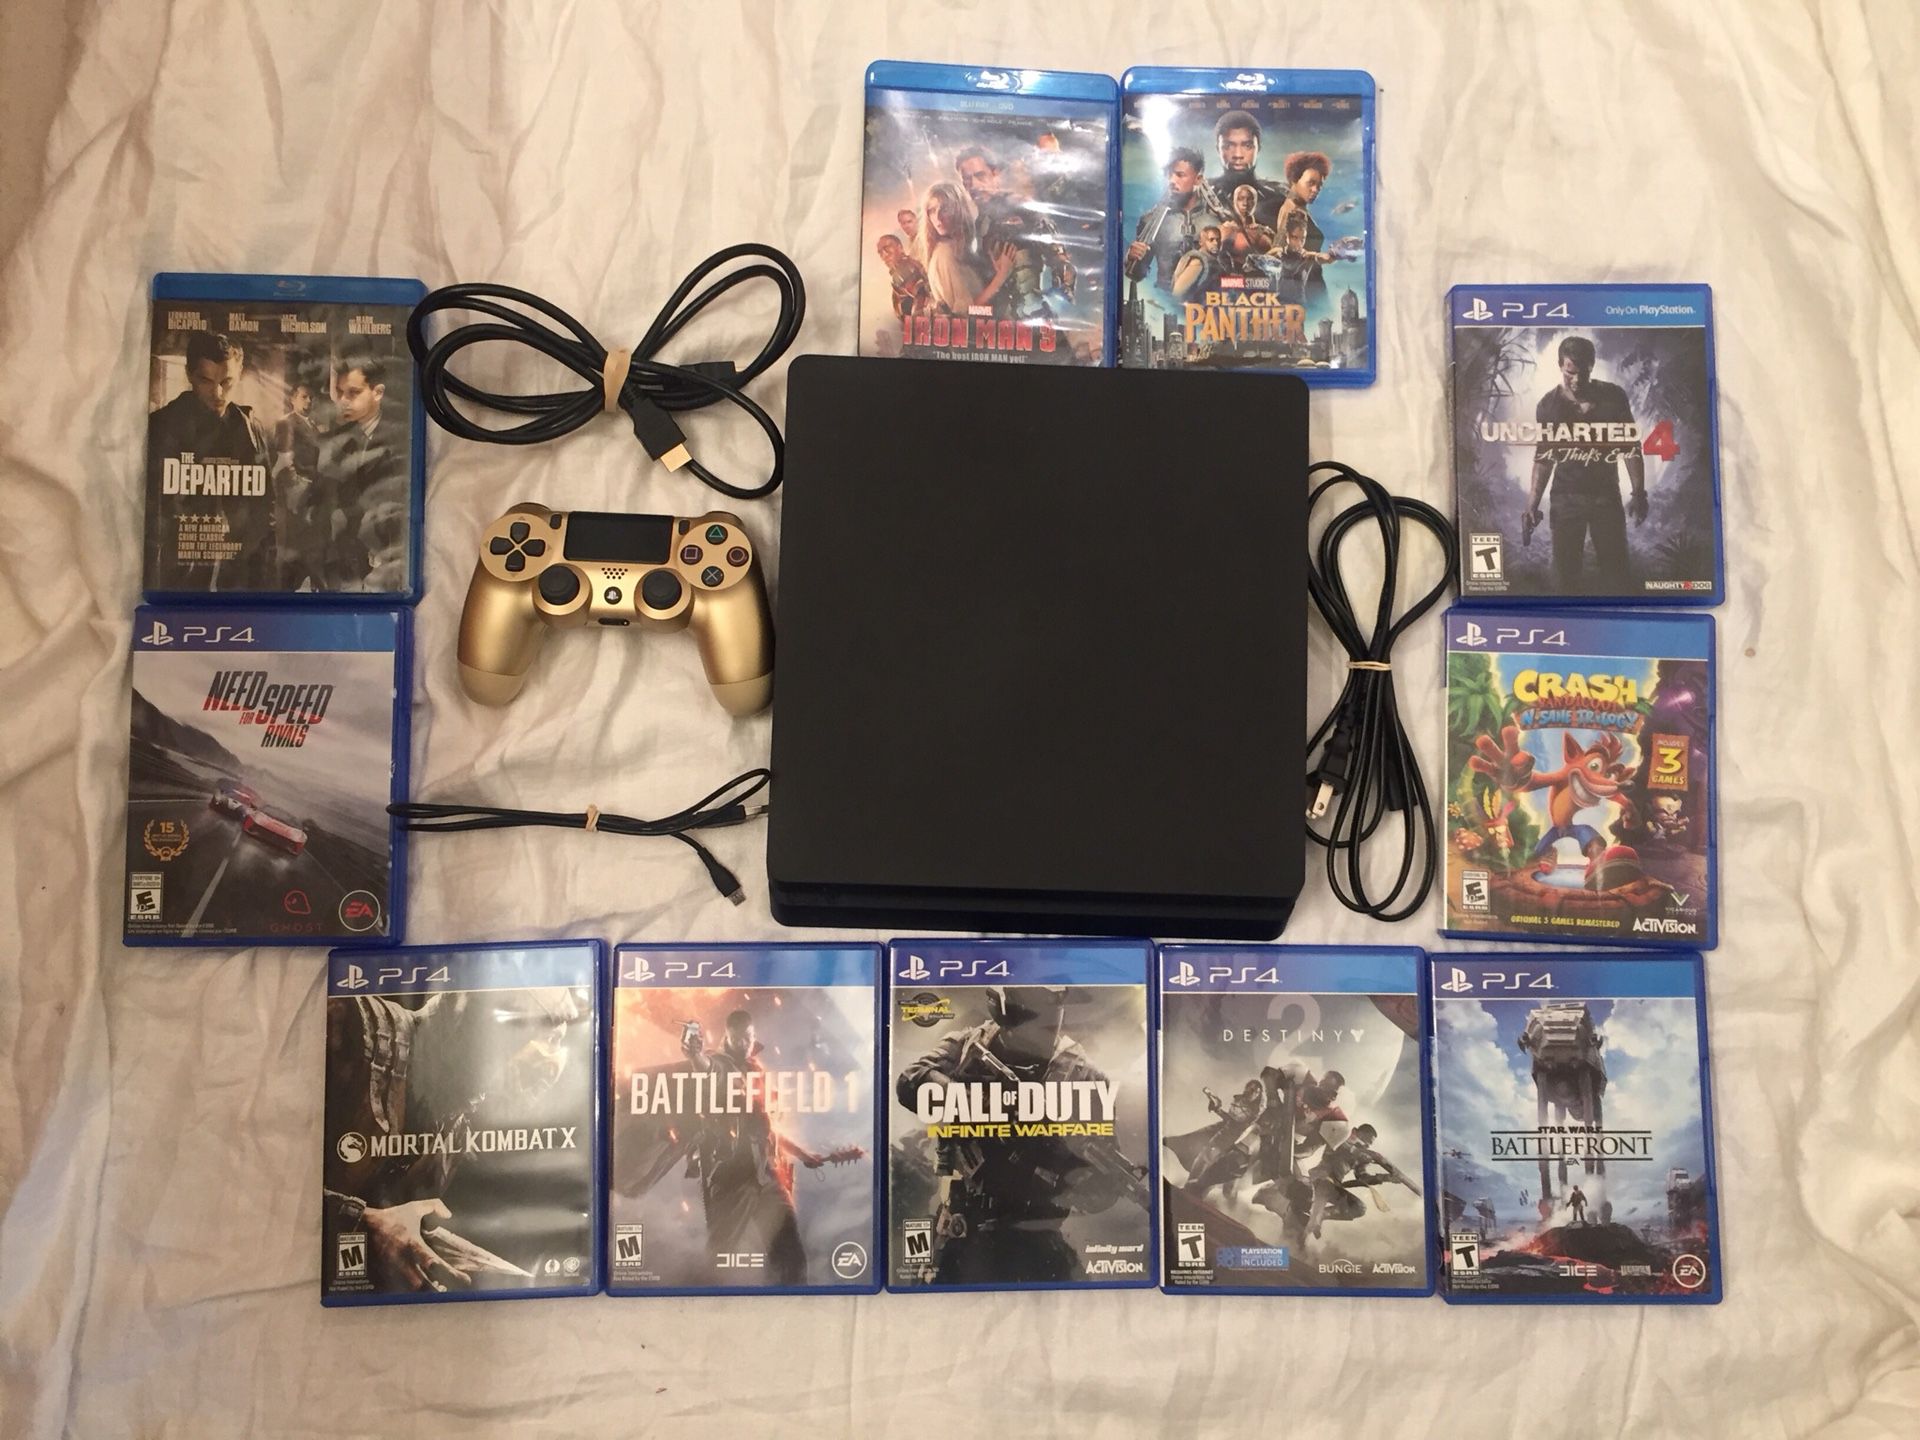 PS4, 10 Games, 3 Movies, Price Firm, Retails for 450$ on Amazon with Zero Games not counting tax or shipping...2 Games Added GTA 5 Final Fantasy XV